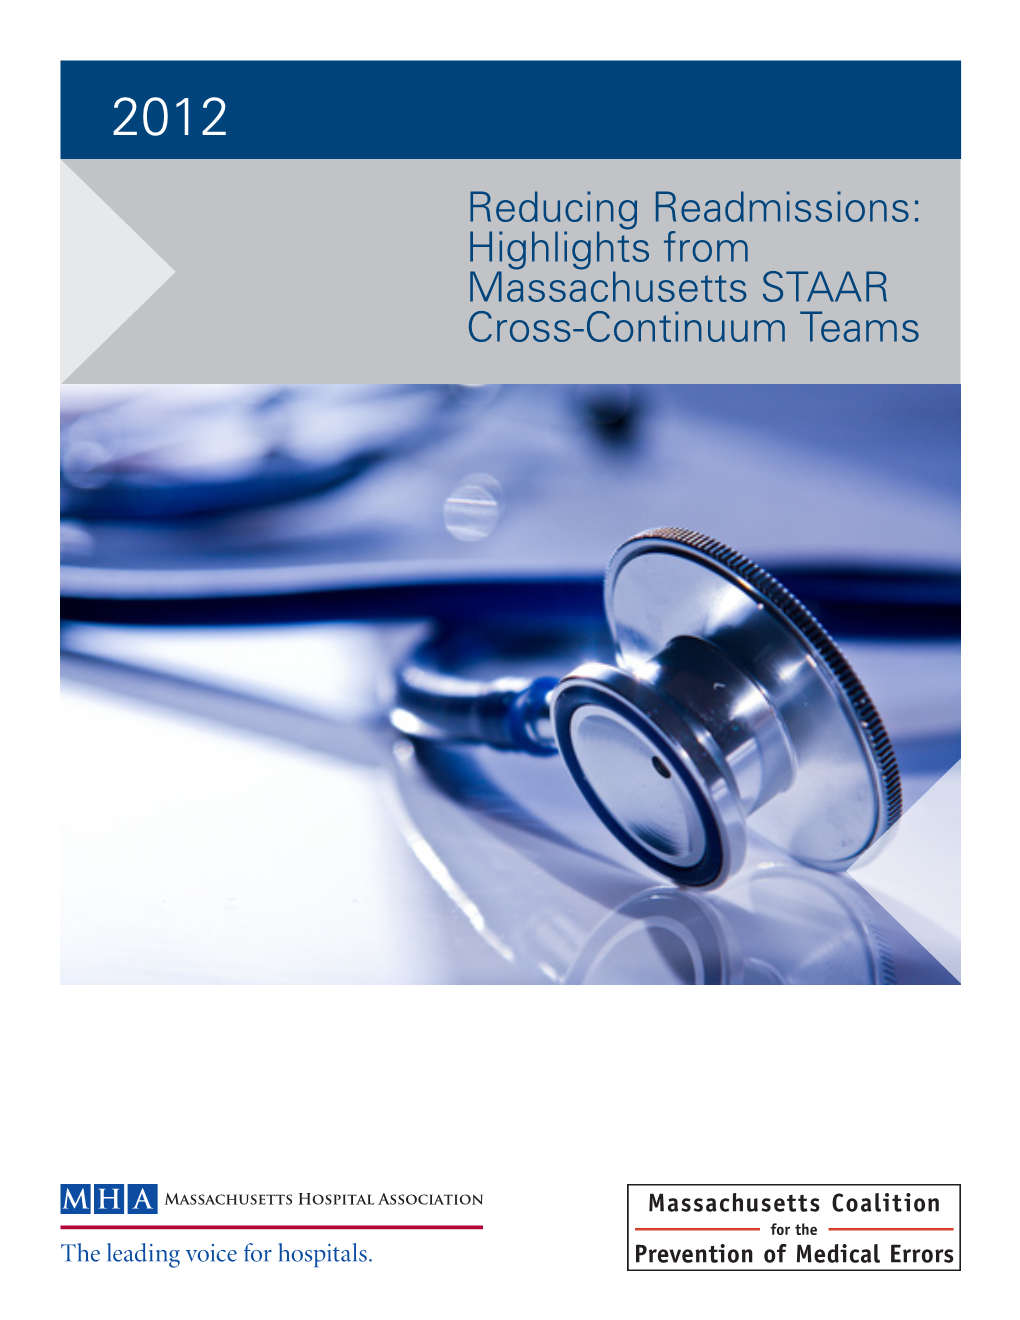 Reducing Readmissions: Highlights from Massachusetts STAAR Cross-Continuum Teams Reducing Readmissions: Highlights from Massachusetts STAAR Cross-Continuum Teams